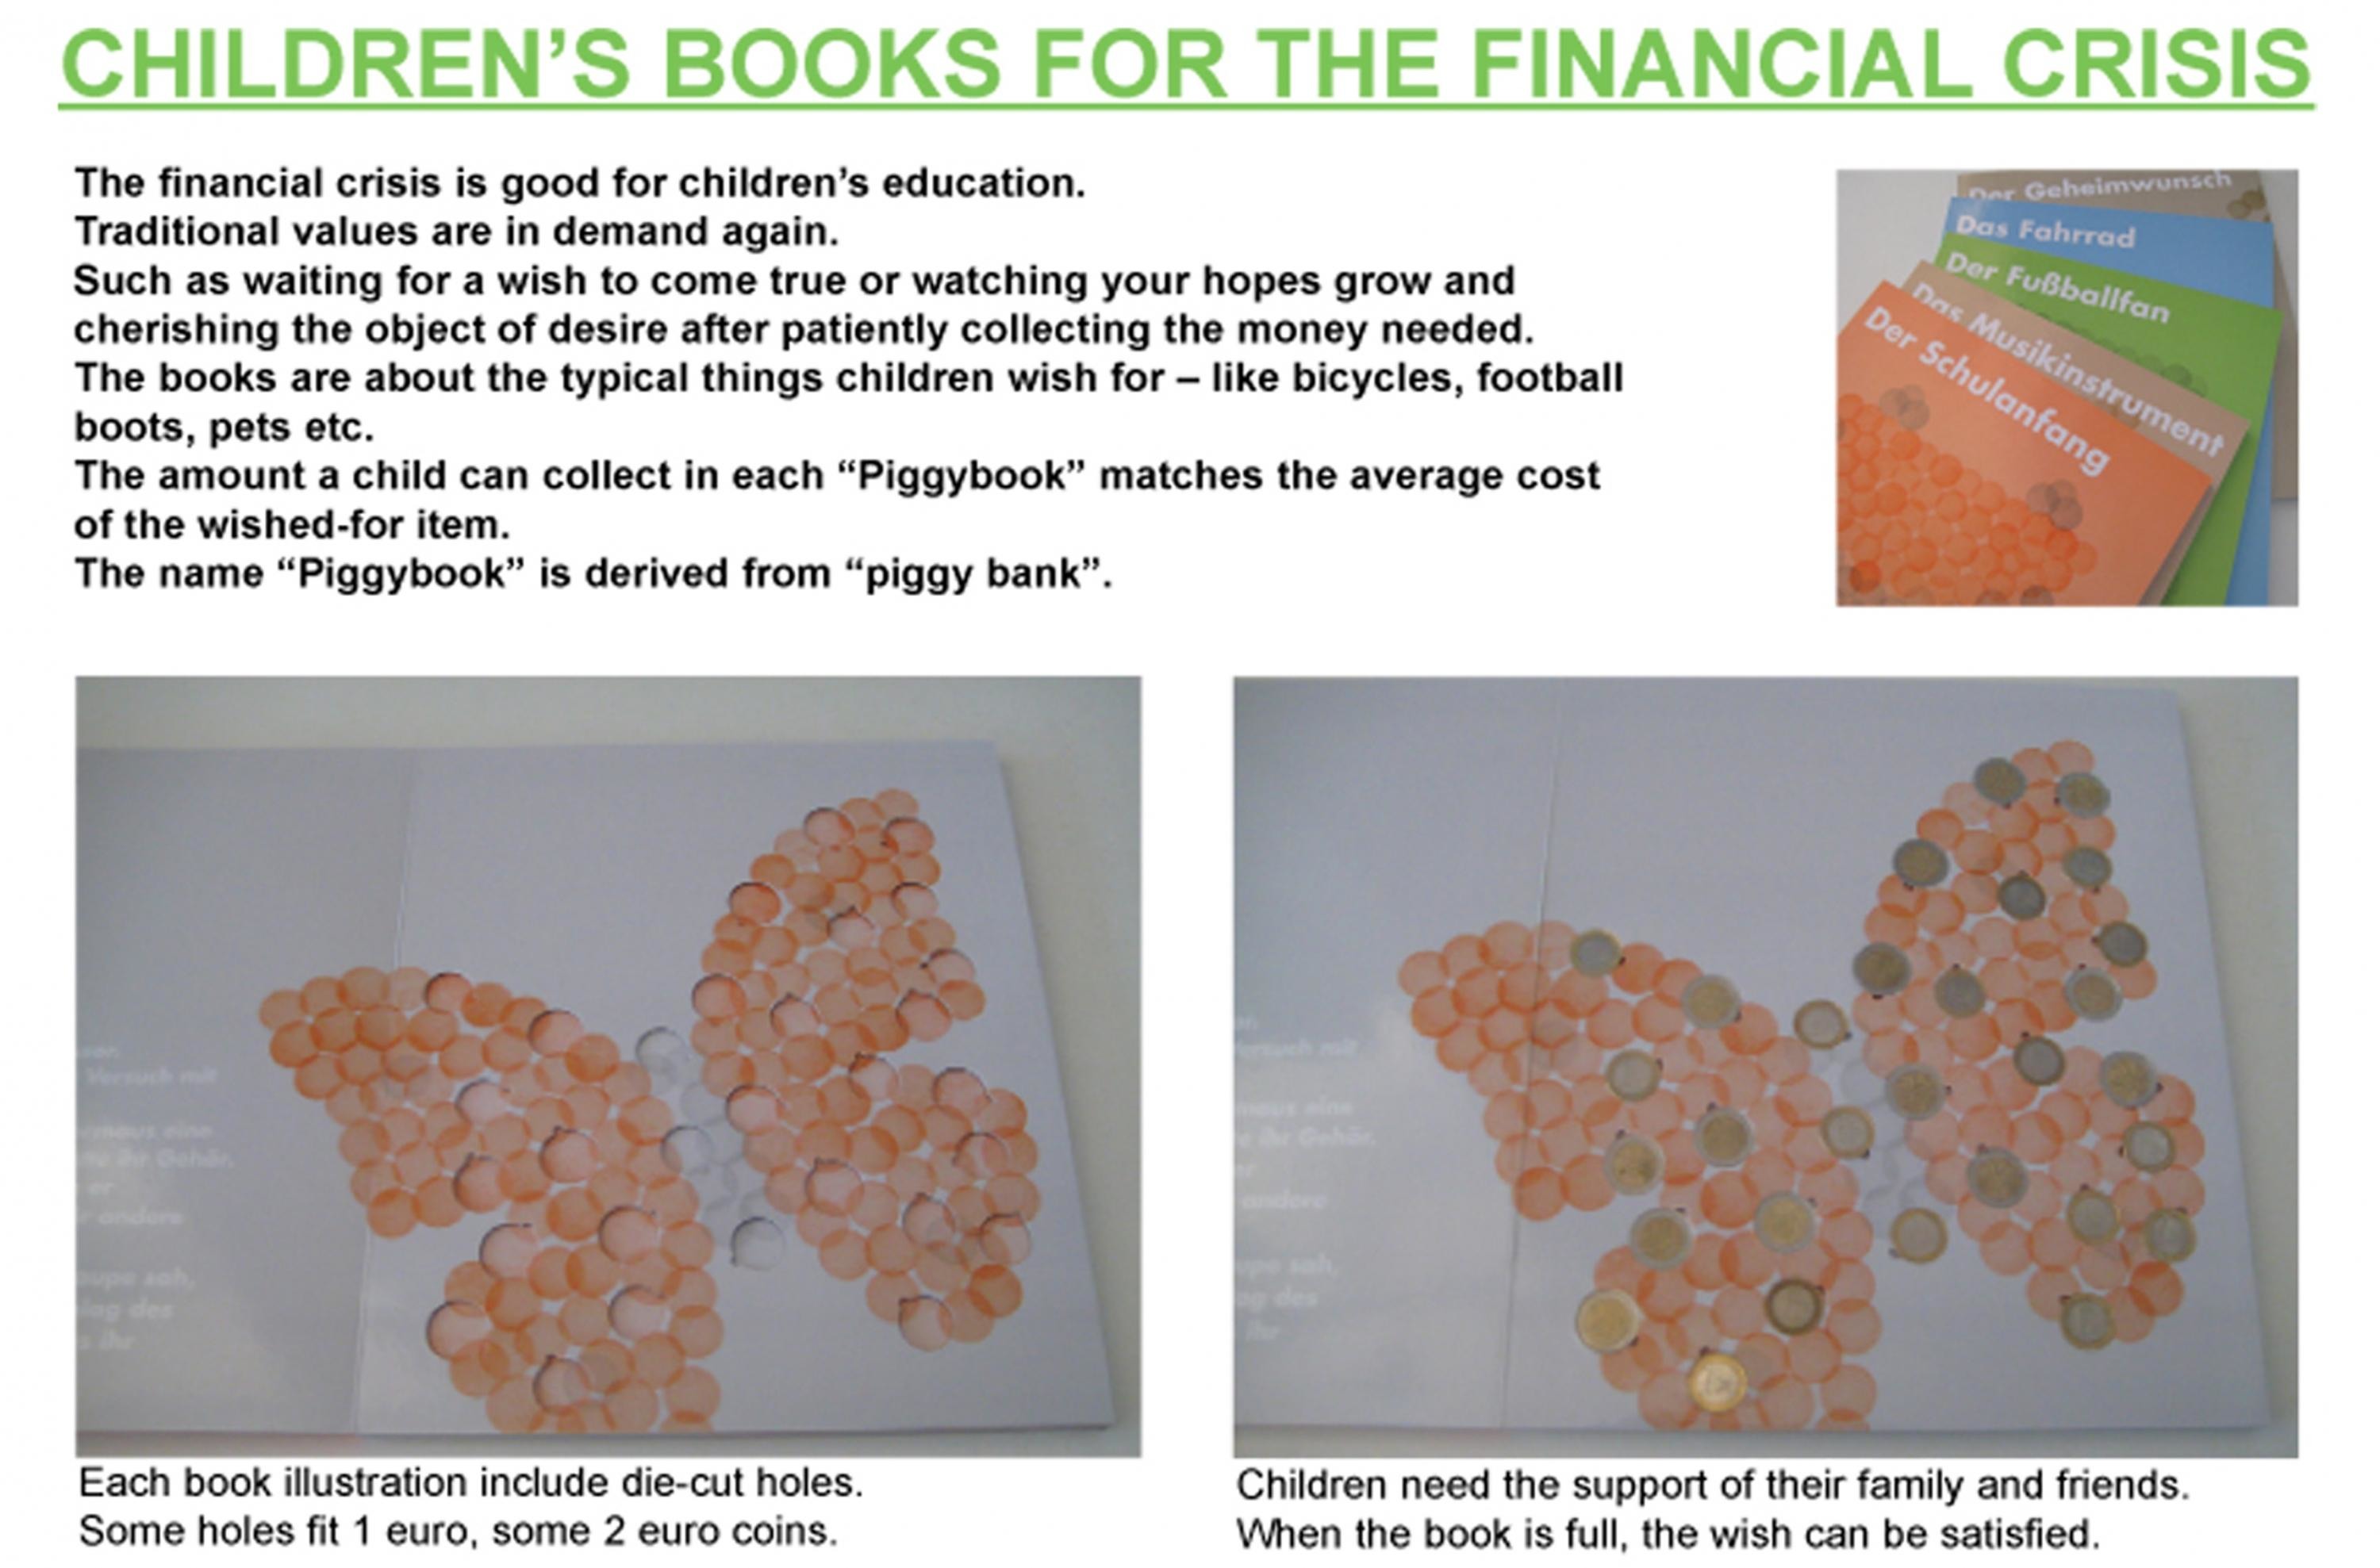 CHILDREN'S BOOKS FOR THE FINANCIAL CRISIS